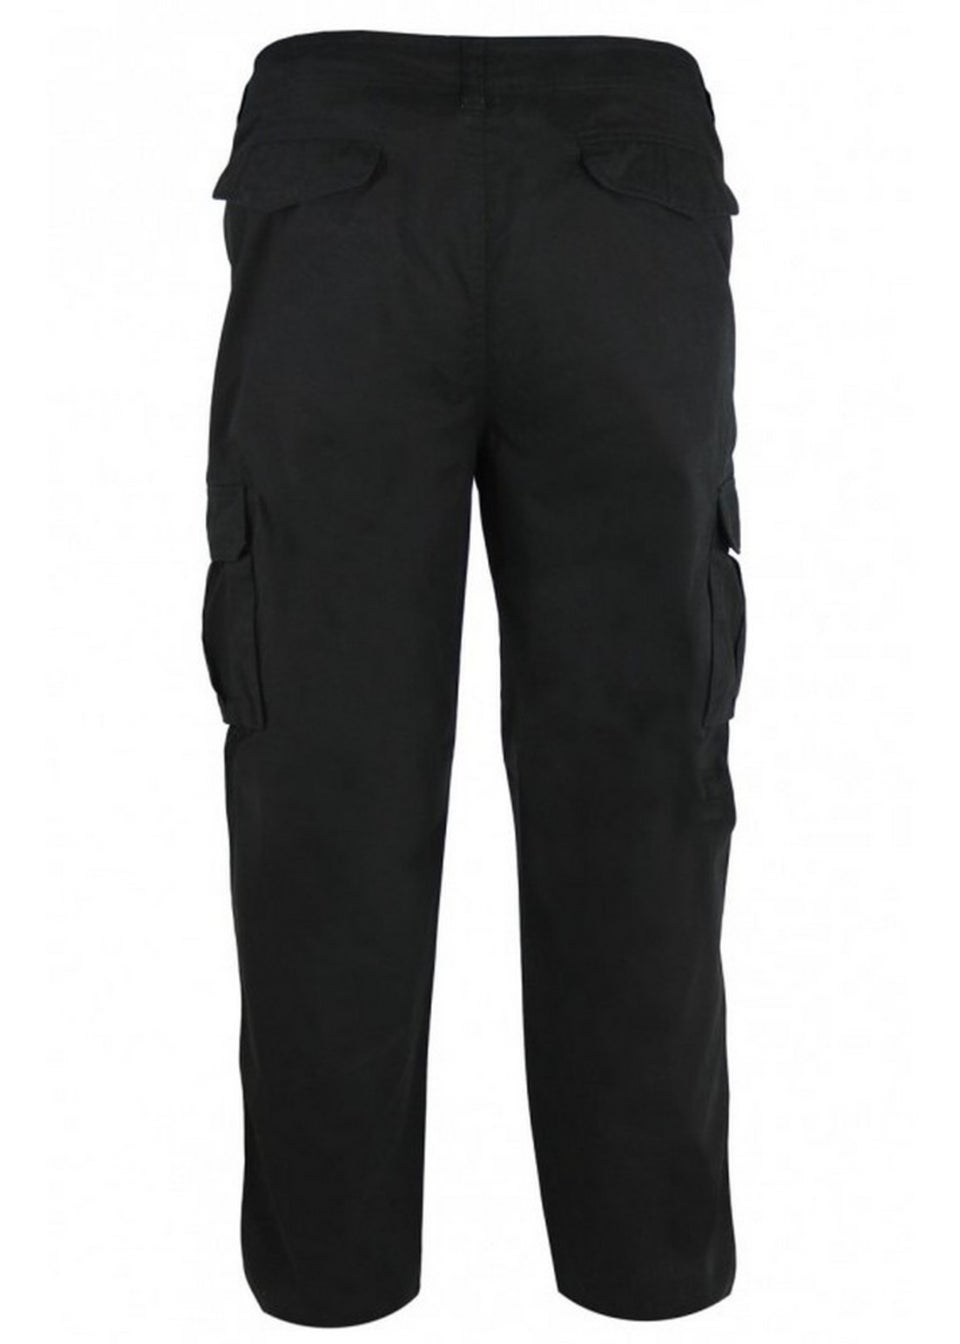 Duke Black Robert Peached And Washed Cotton Cargo Trousers